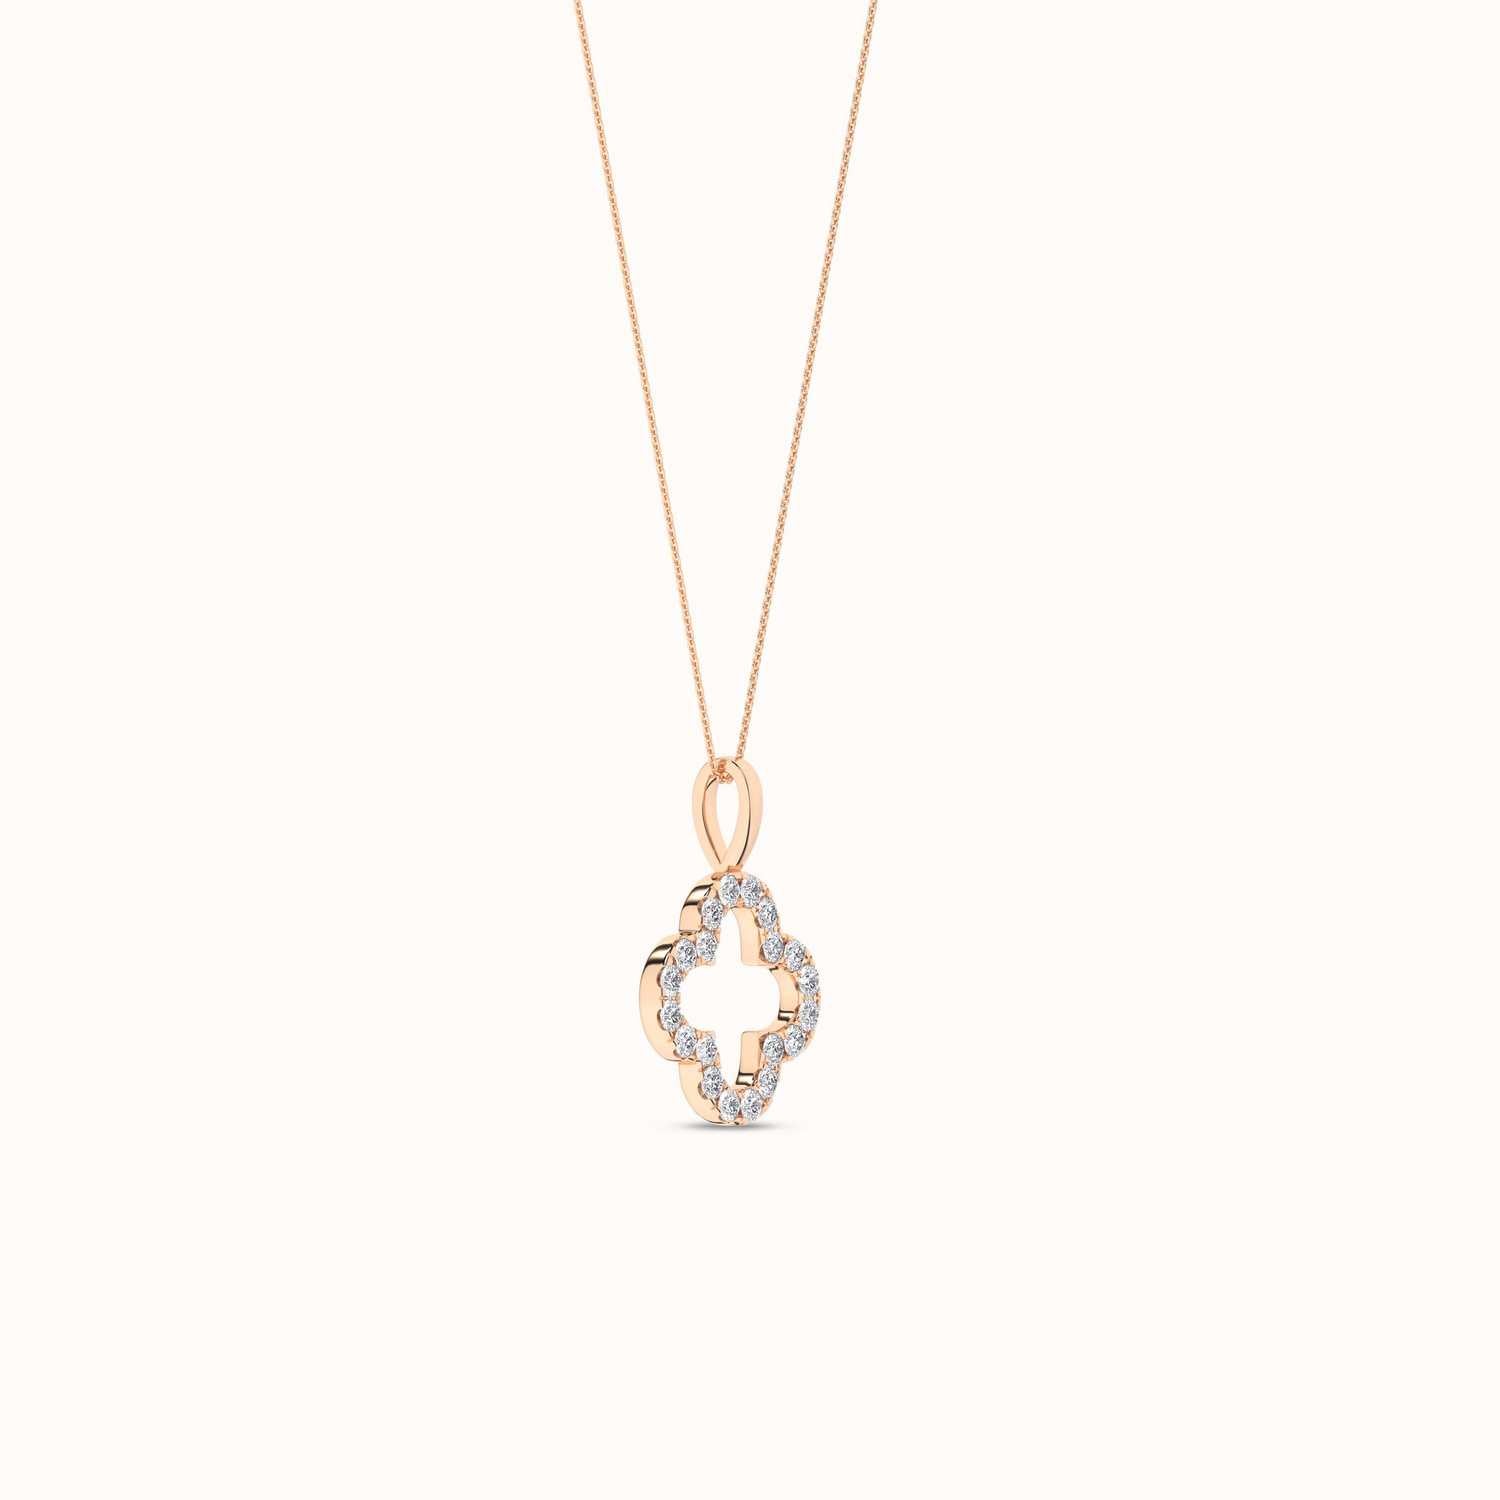 Clover Silhouette Drop Necklace_Product Angle_1/5Ct. - 2